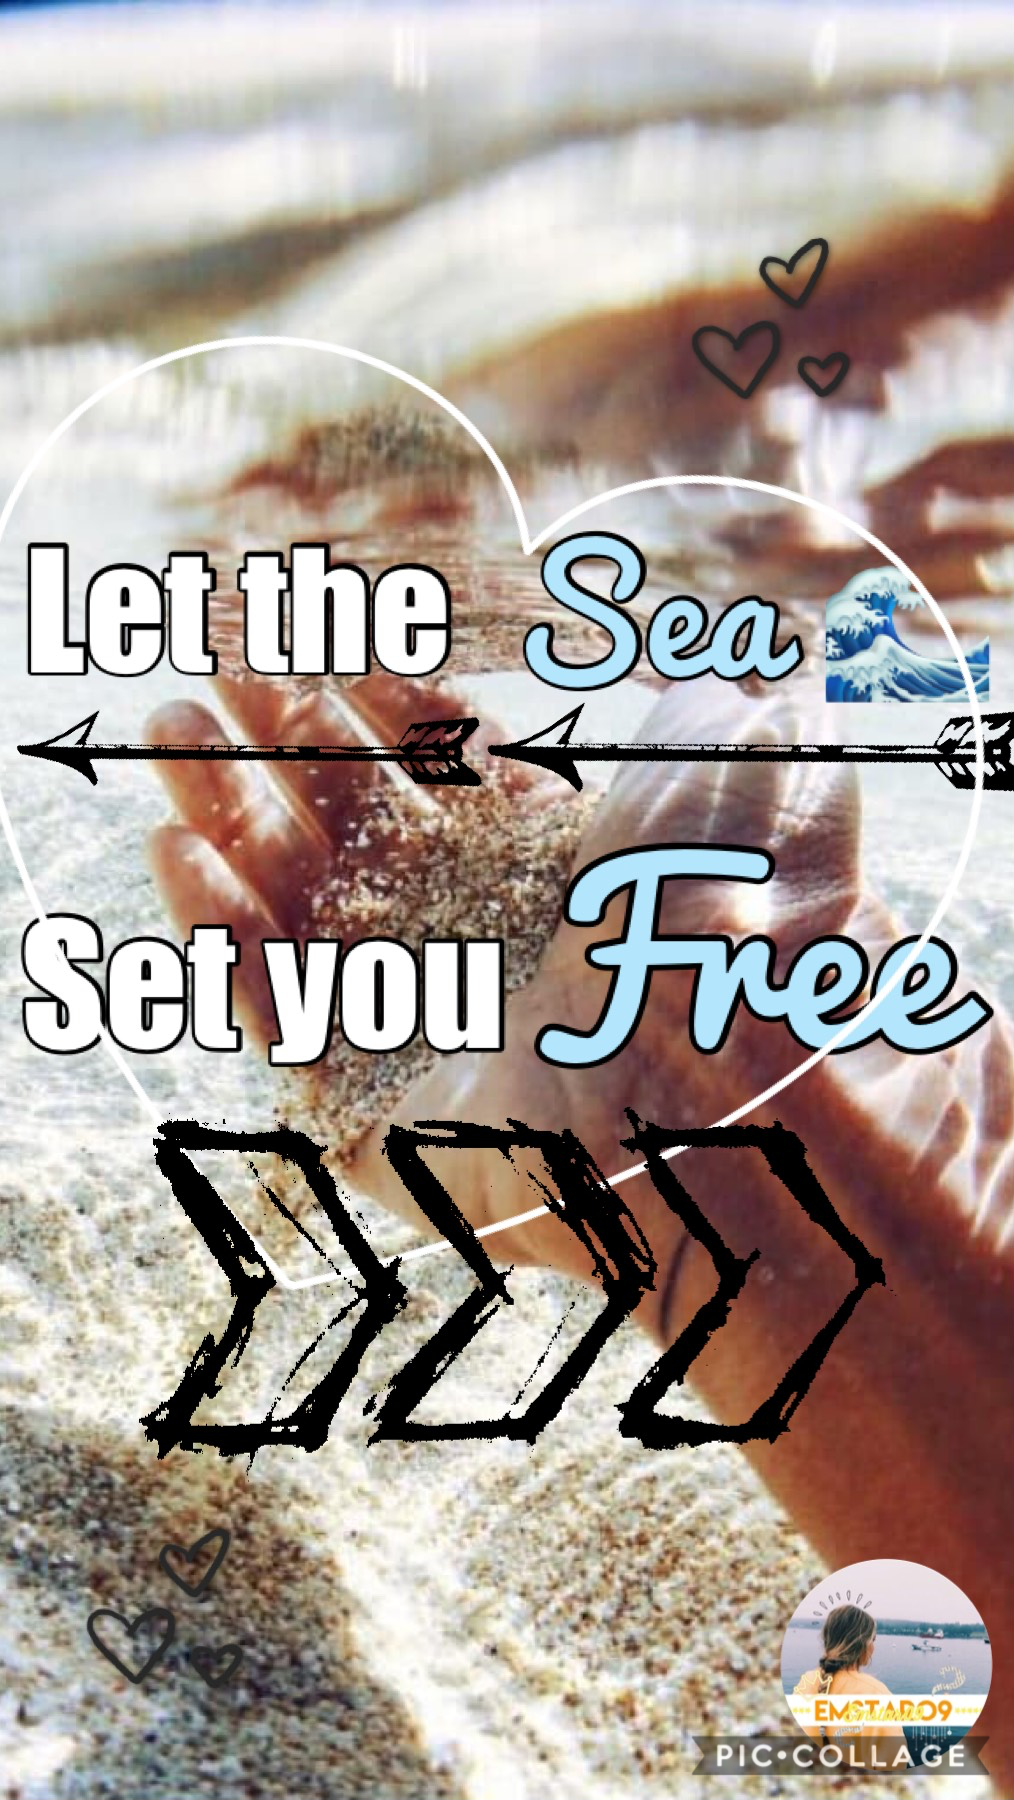 Tap...

I’m going to start putting my fantastic logo created by audreyhepburn24 on the bottom right corner of all my collages!

Let the sea 🌊, set you free!